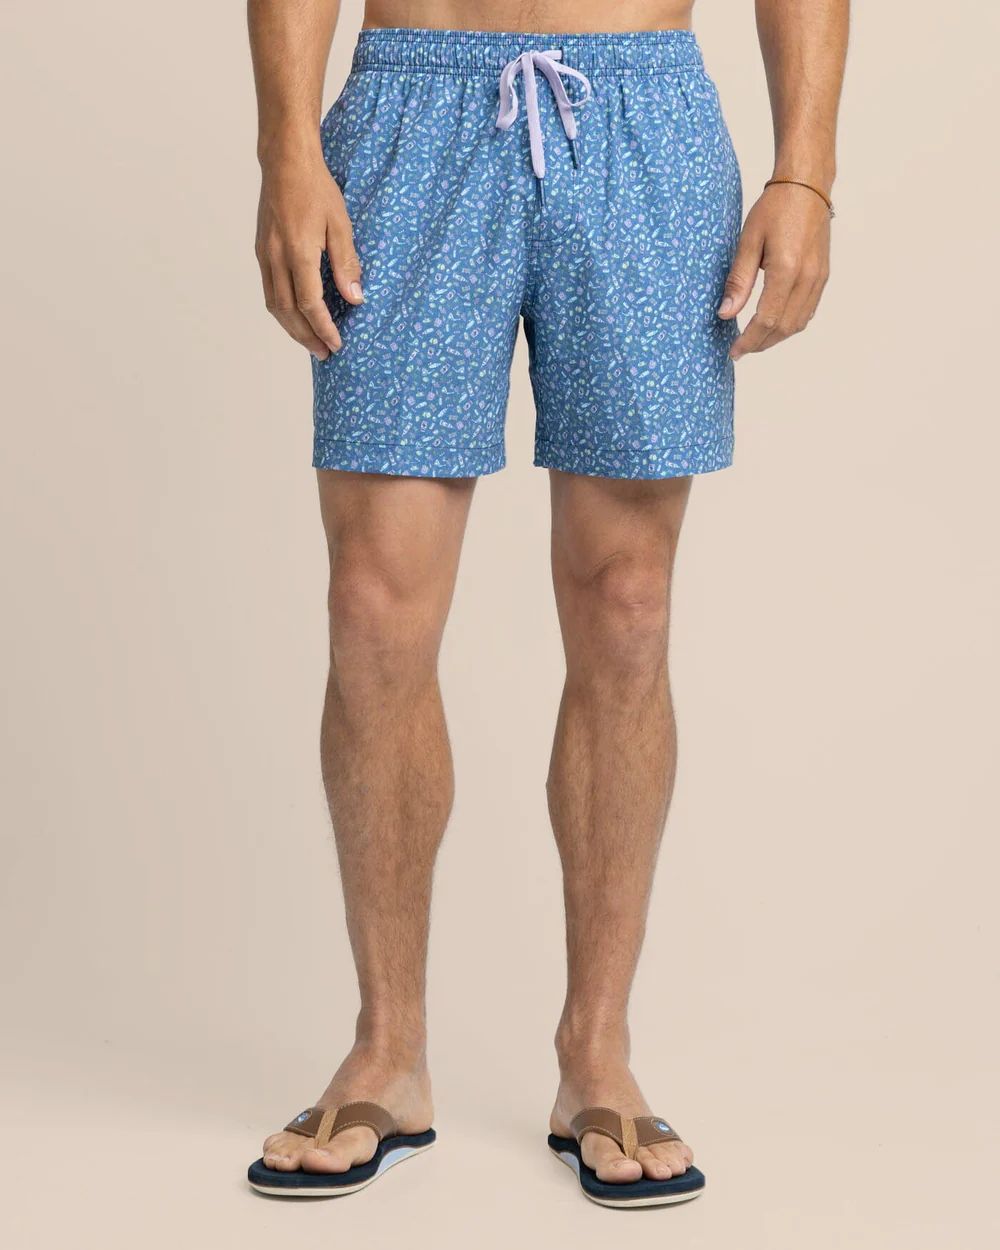 Dazed and Transfused Swim Trunk | Southern Tide